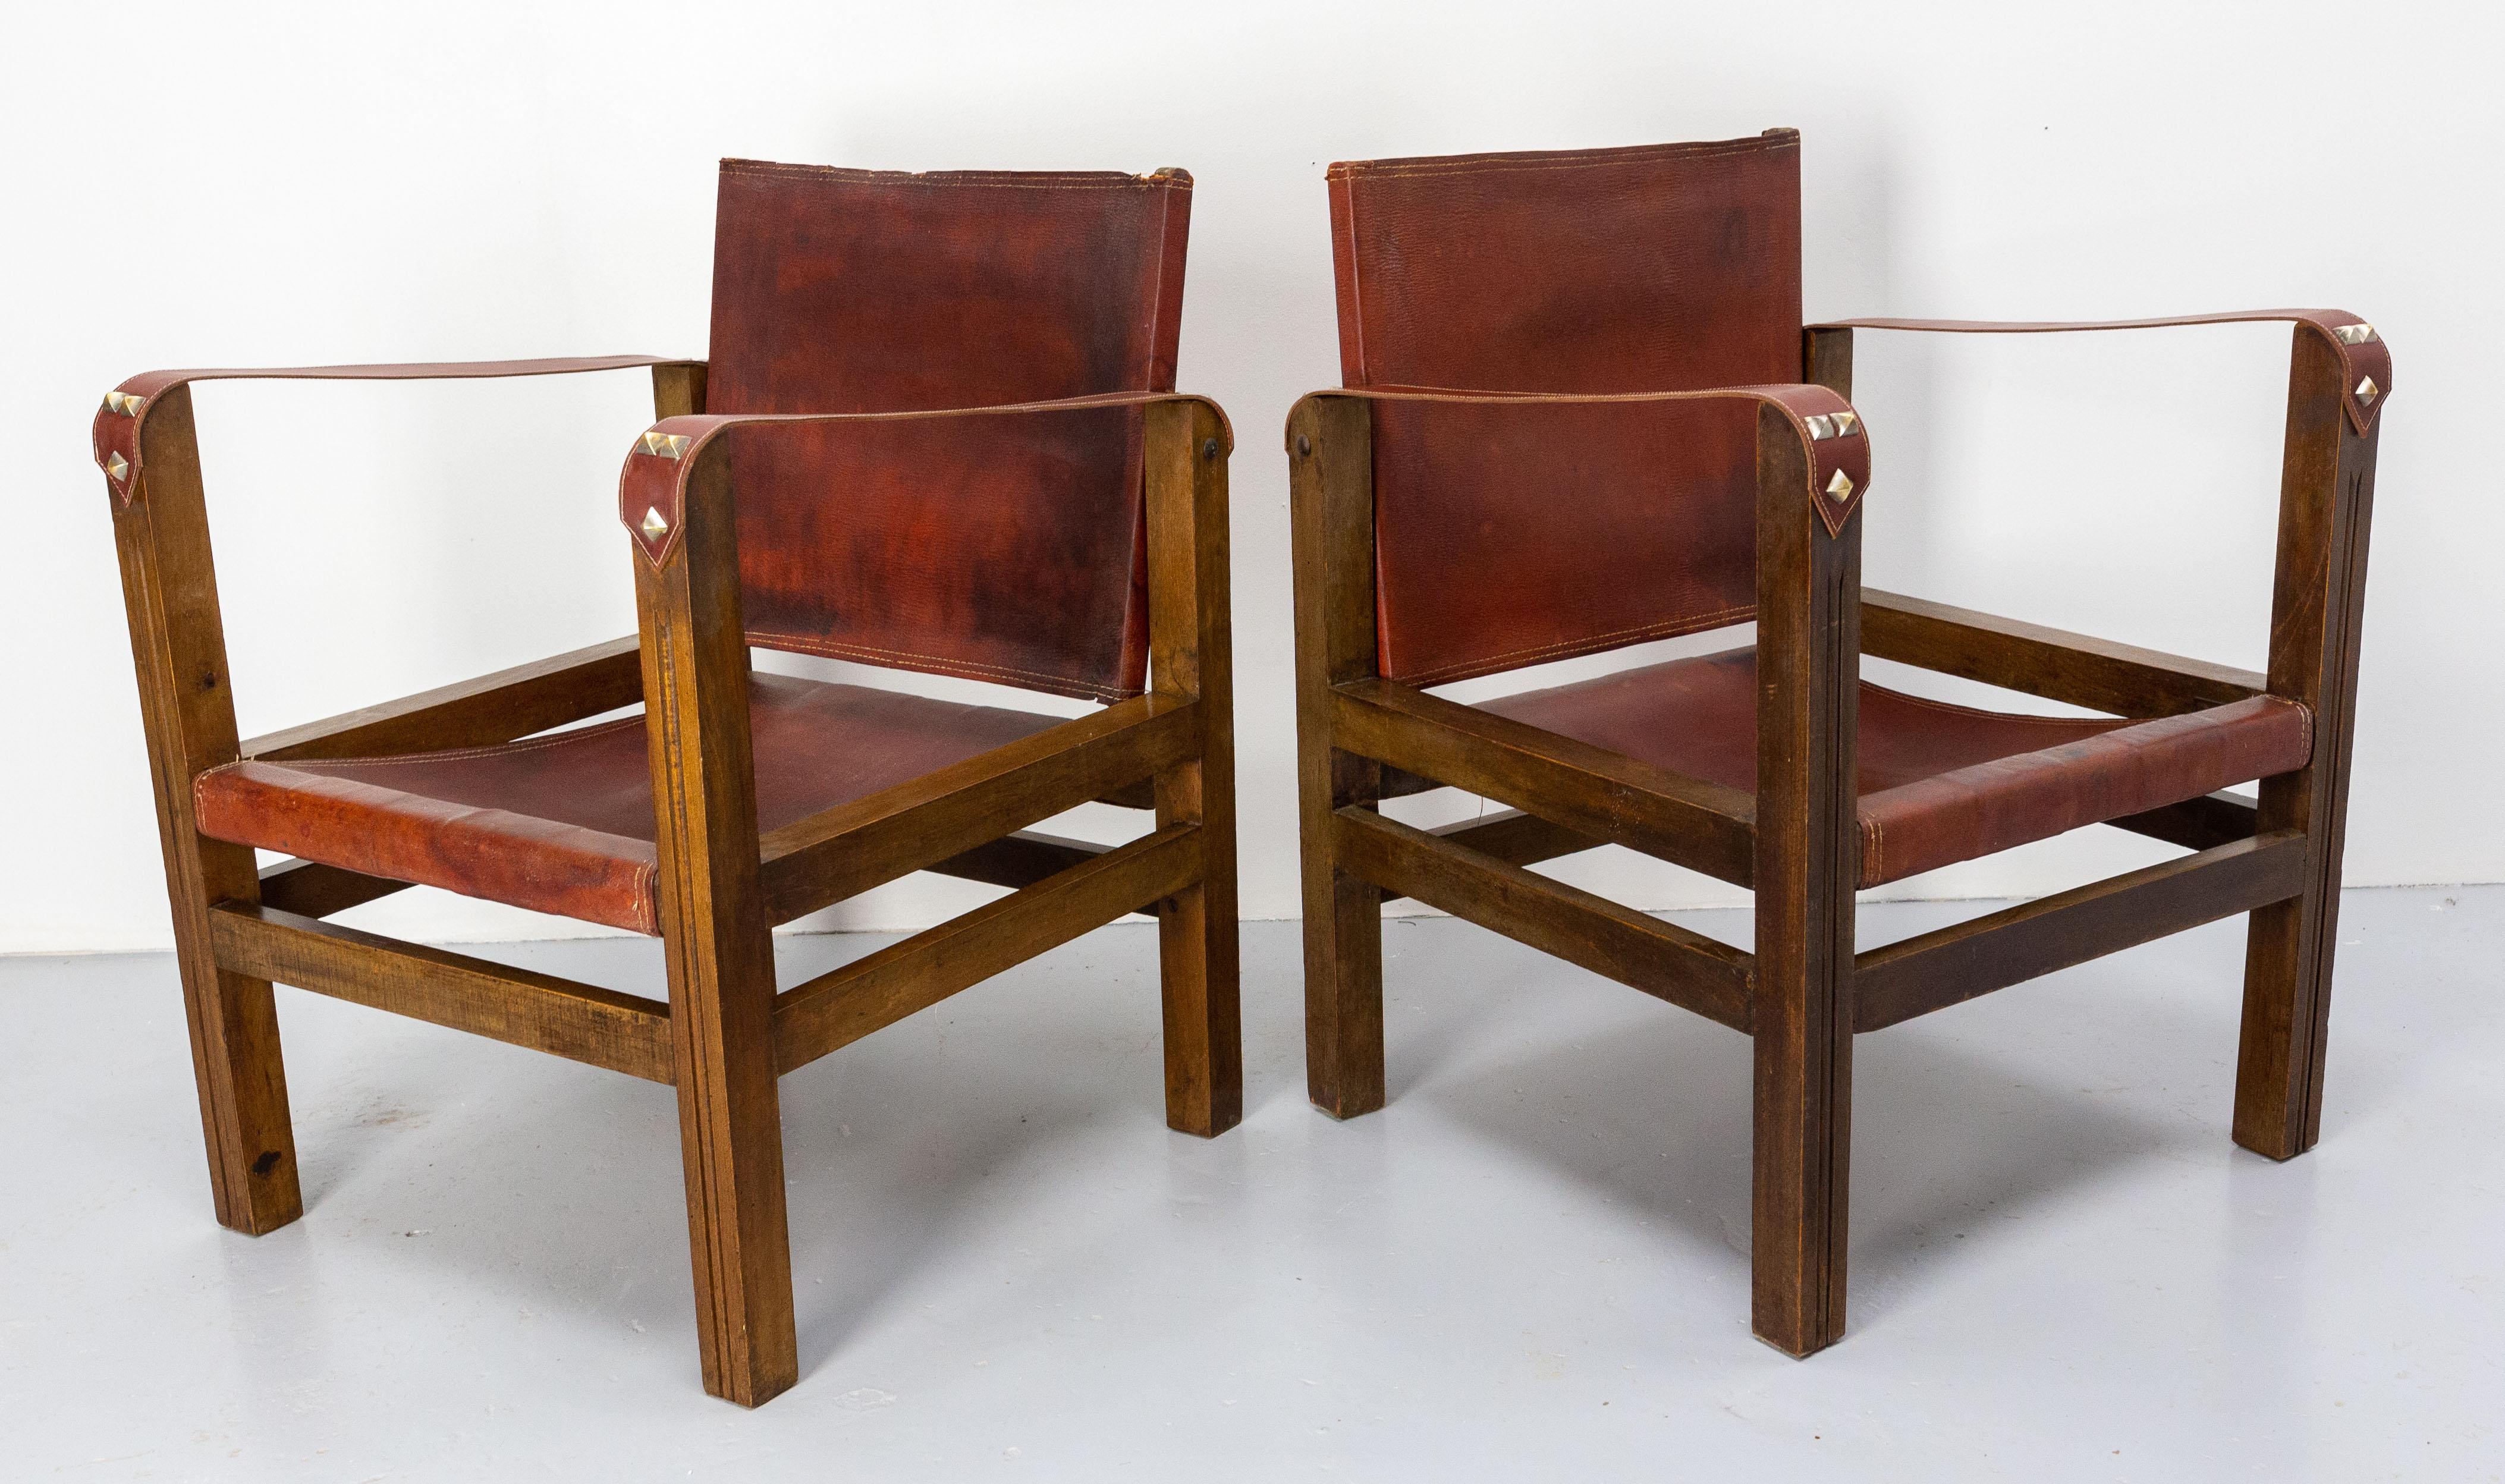 Pair of Fauteuils Open Armchairs French Leather and Beech Safari Style, C. 1940 In Good Condition For Sale In Labrit, Landes